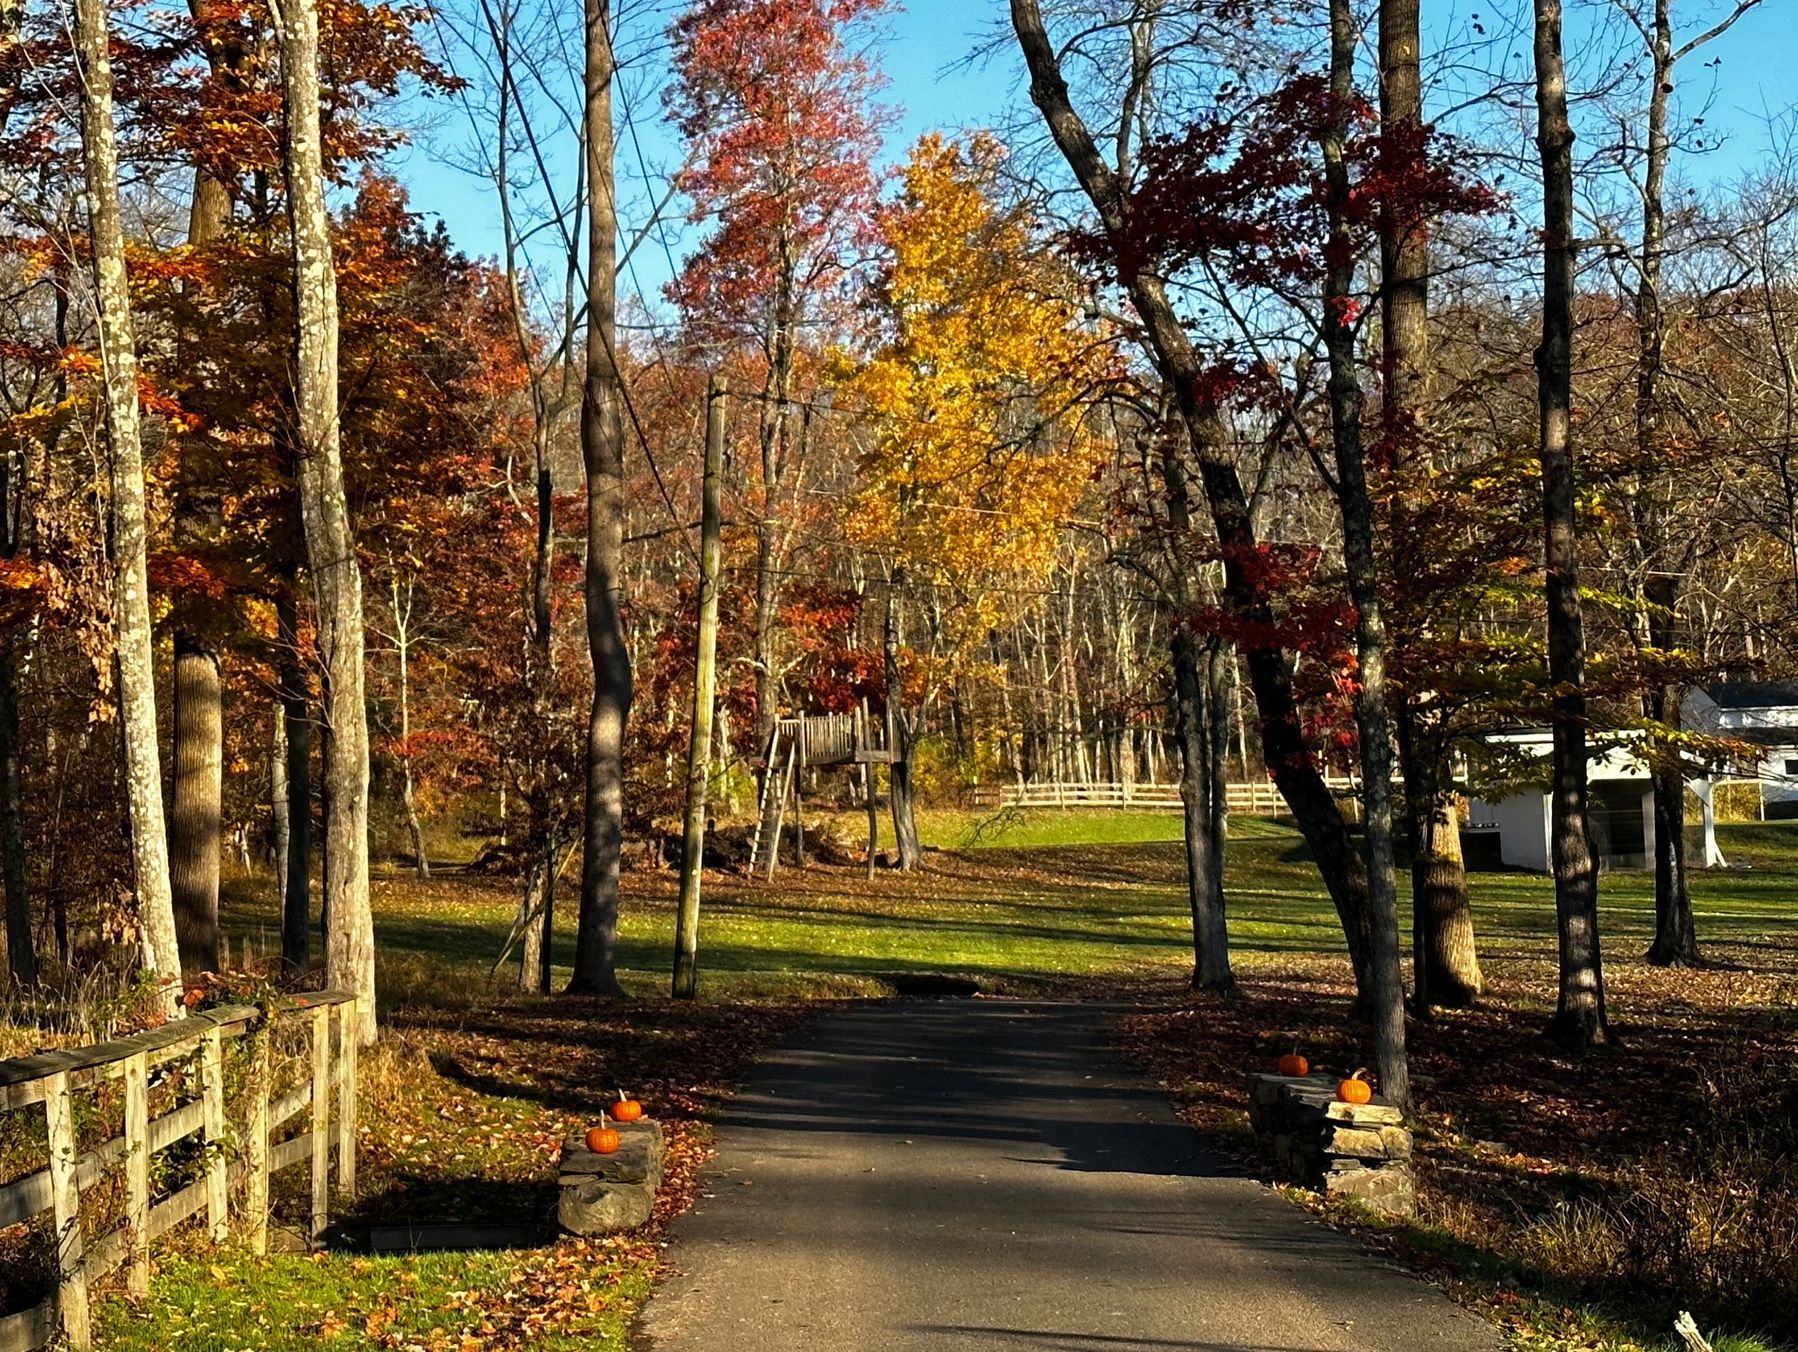 Meandering driveway leads to your AirBnB in Hopewell, NJ.